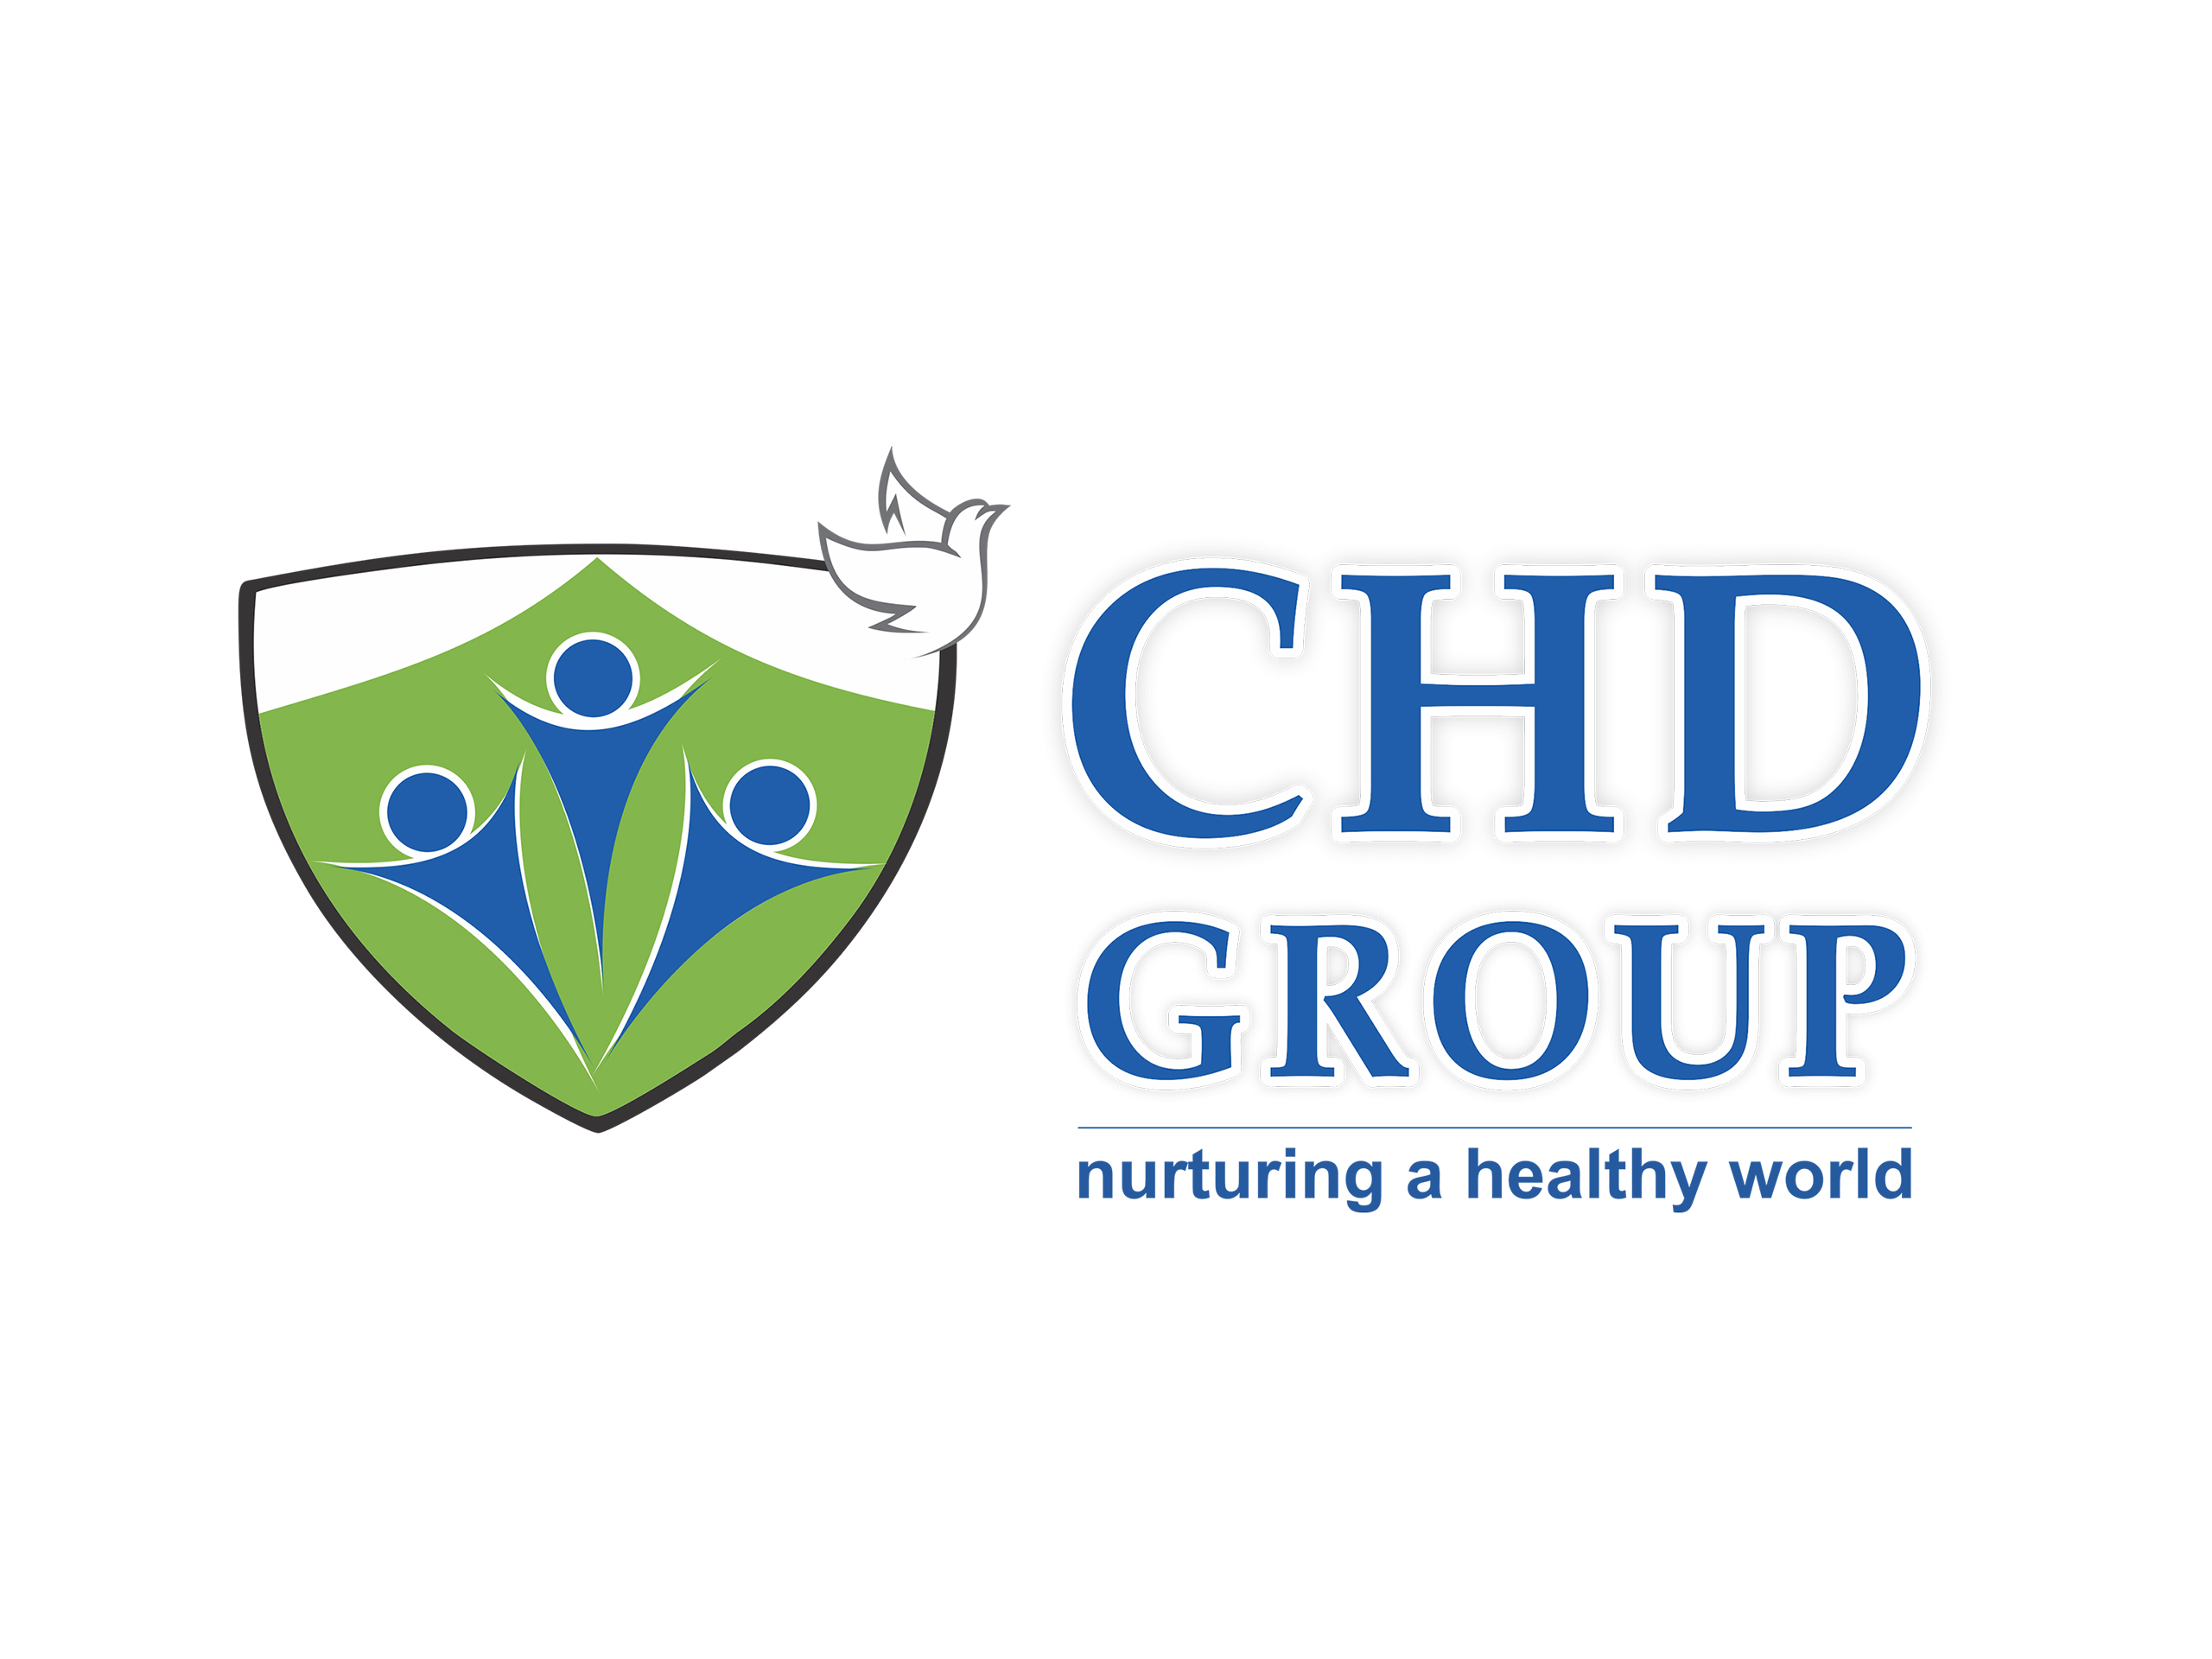 10 ways in which CHD Group has revolutionised Healthcare in India